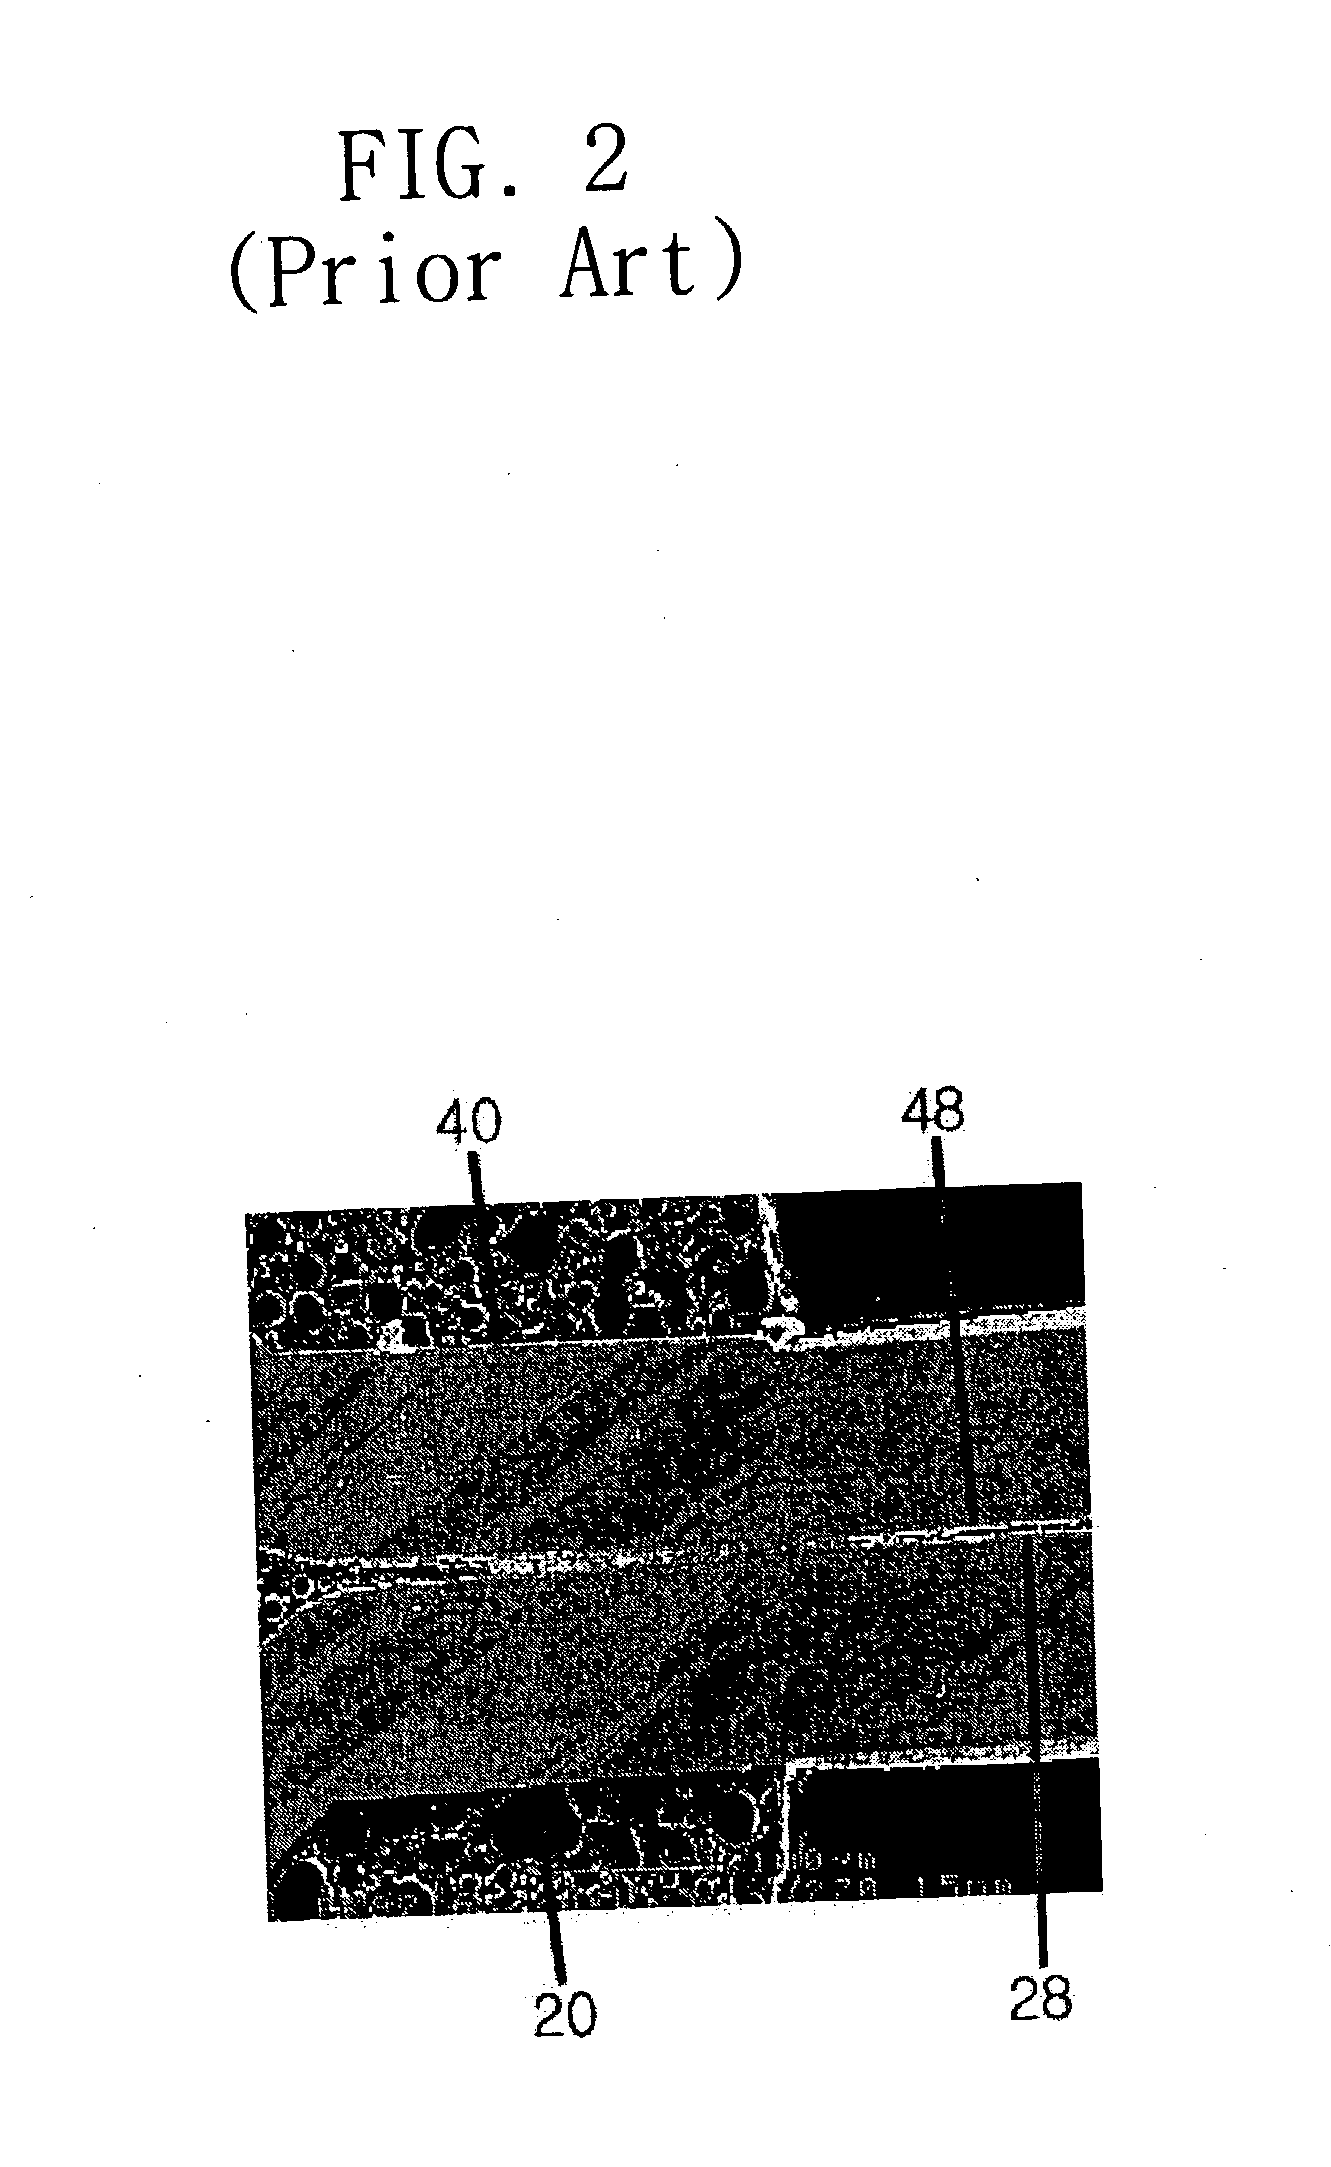 Method for joining lead frames in a package assembly, method for forming a chip stack package, and a chip stack package